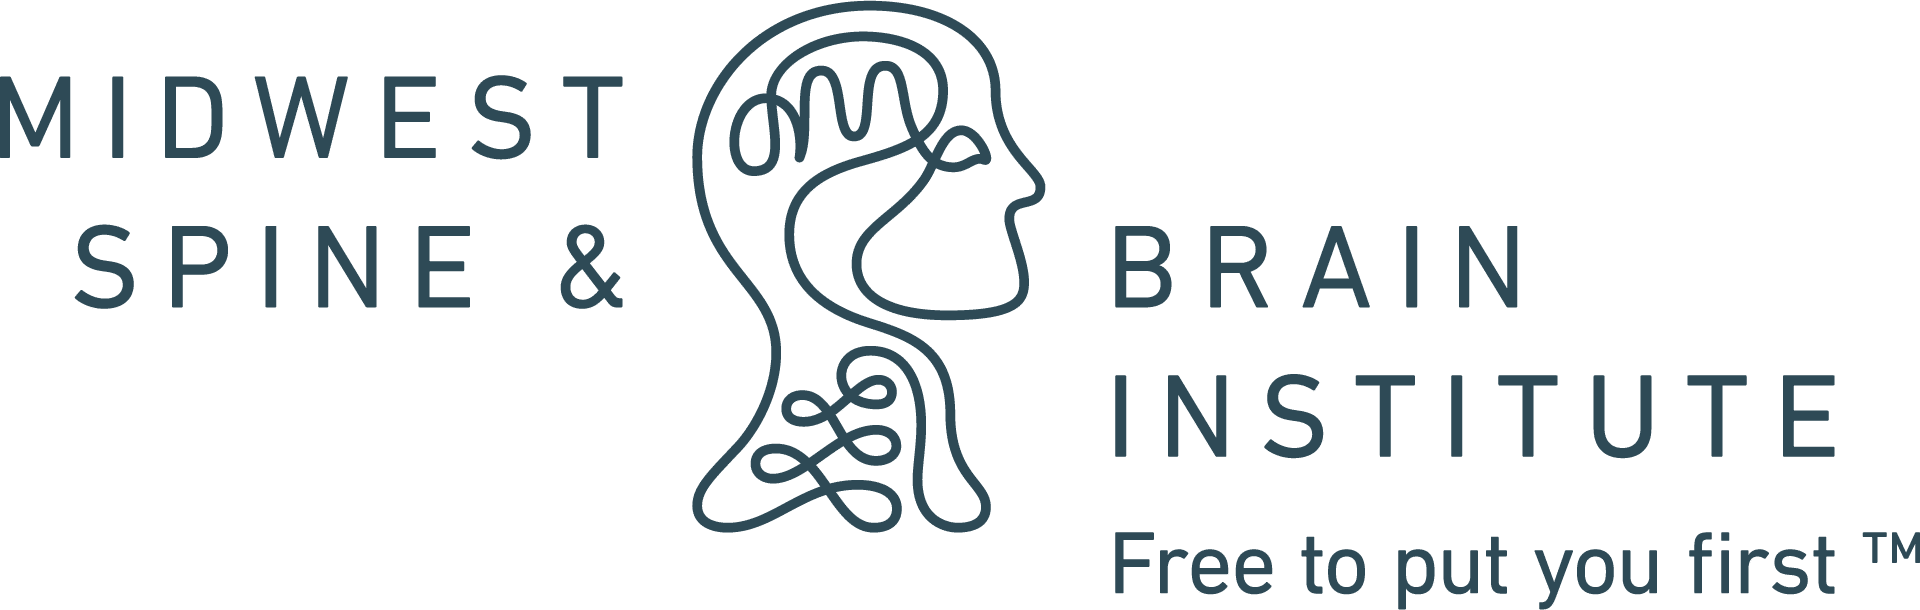 Midwest Spine and Brain Institute logo